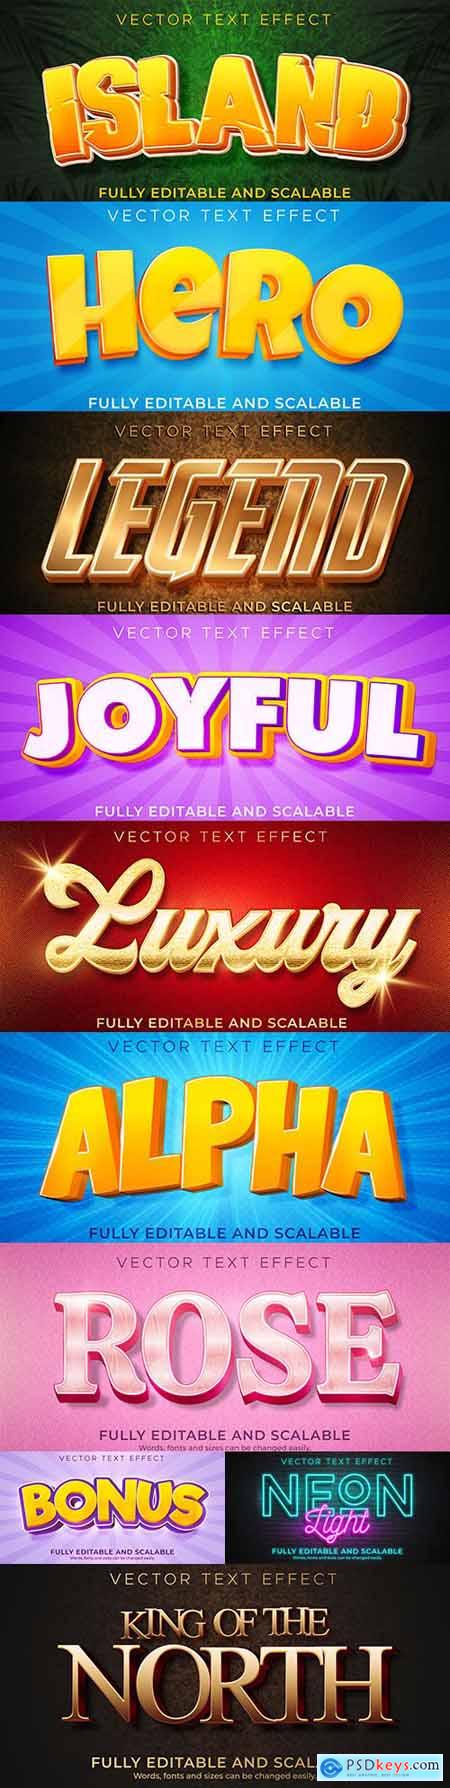 Editable font and 3d effect text design collection illustration 32